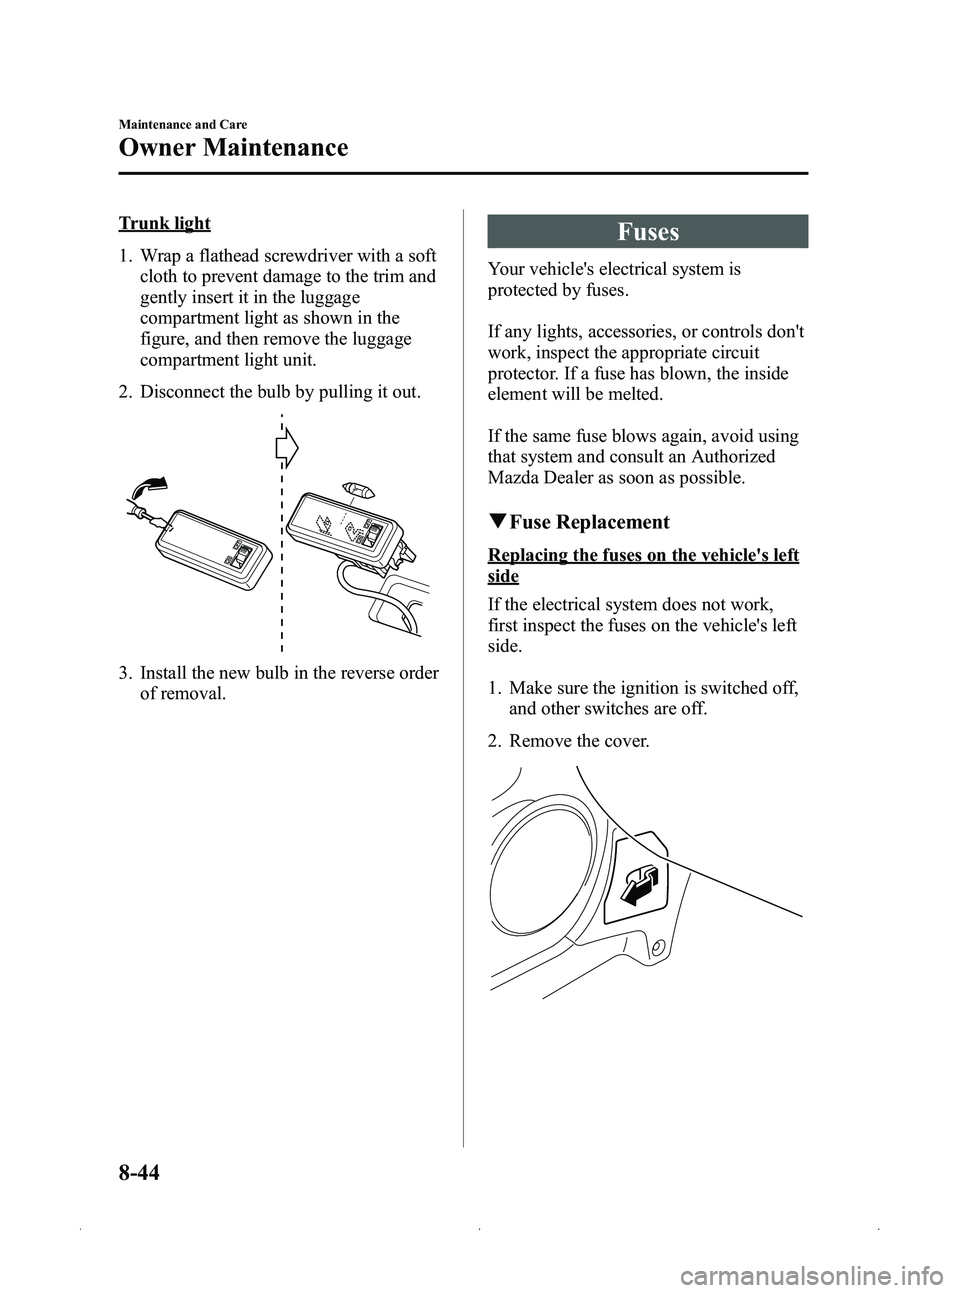 MAZDA MODEL MX-5 MIATA 2012  Owners Manual Black plate (380,1)
Trunk light
1. Wrap a flathead screwdriver with a softcloth to prevent damage to the trim and
gently insert it in the luggage
compartment light as shown in the
figure, and then rem